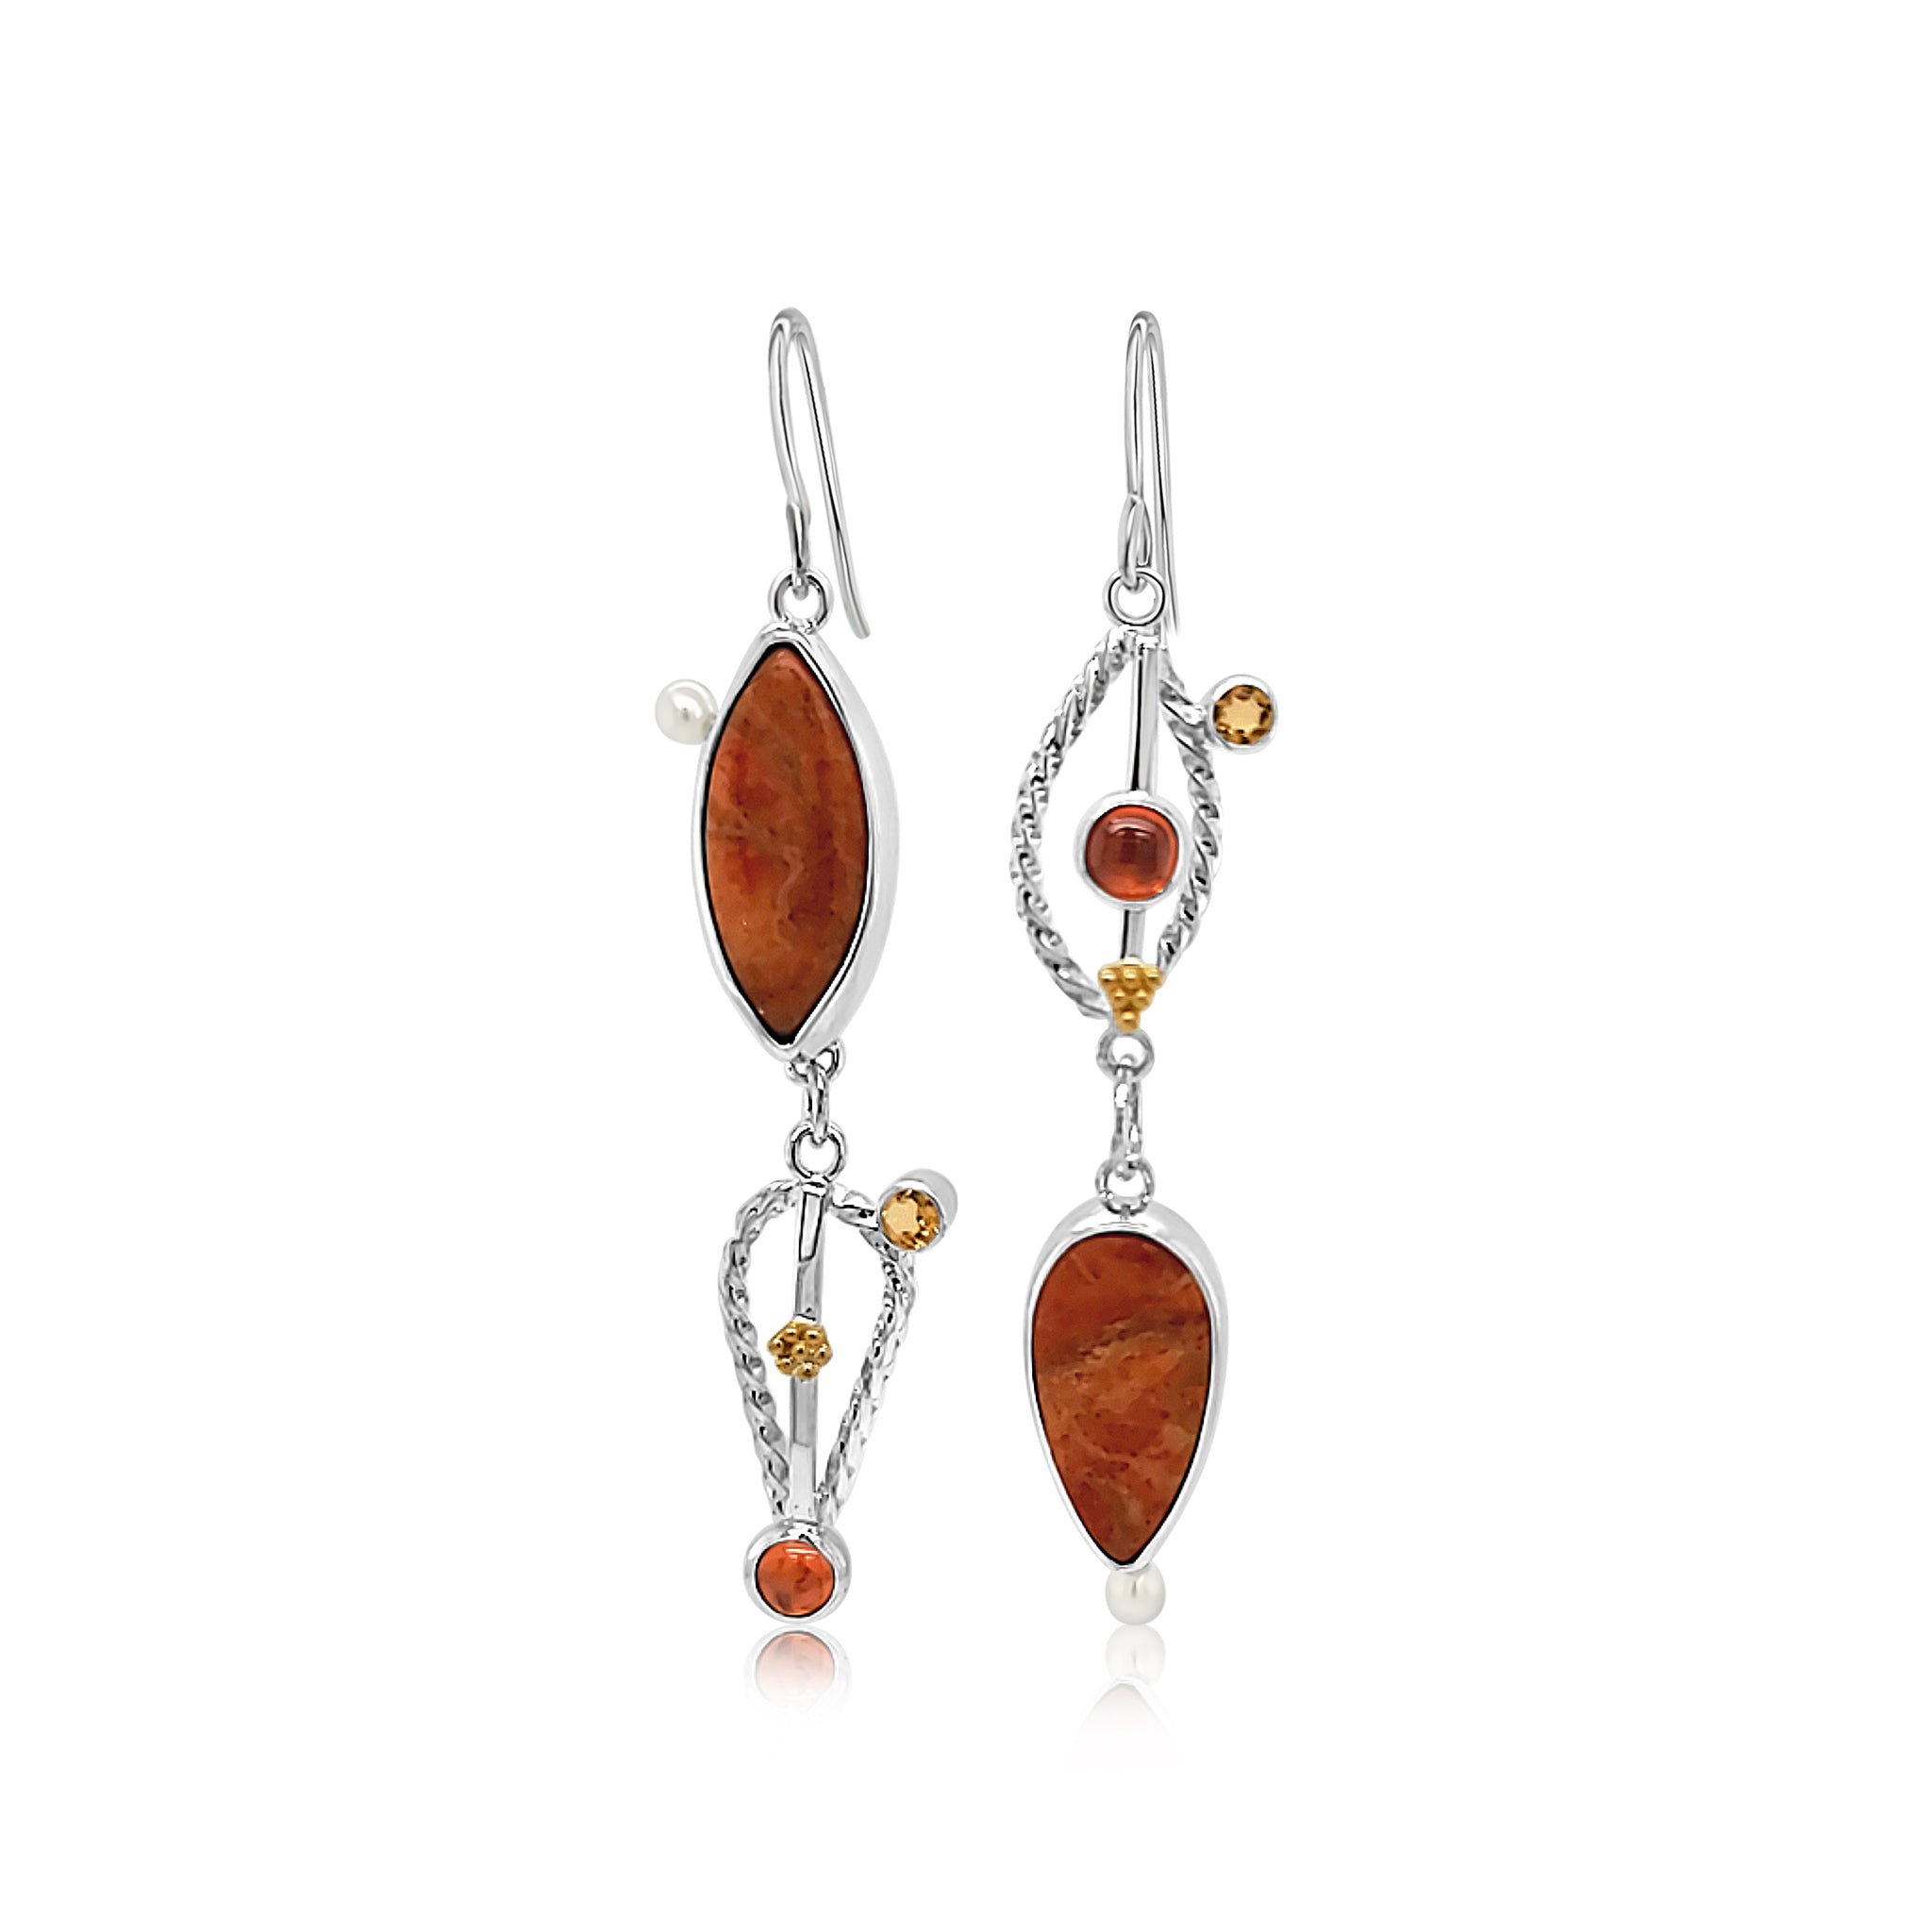 Asymmetric Mohave Turquoise, Citrine, Carnelian and Freshwater Pearls set in Sterling Silver with 22k Gold accents.